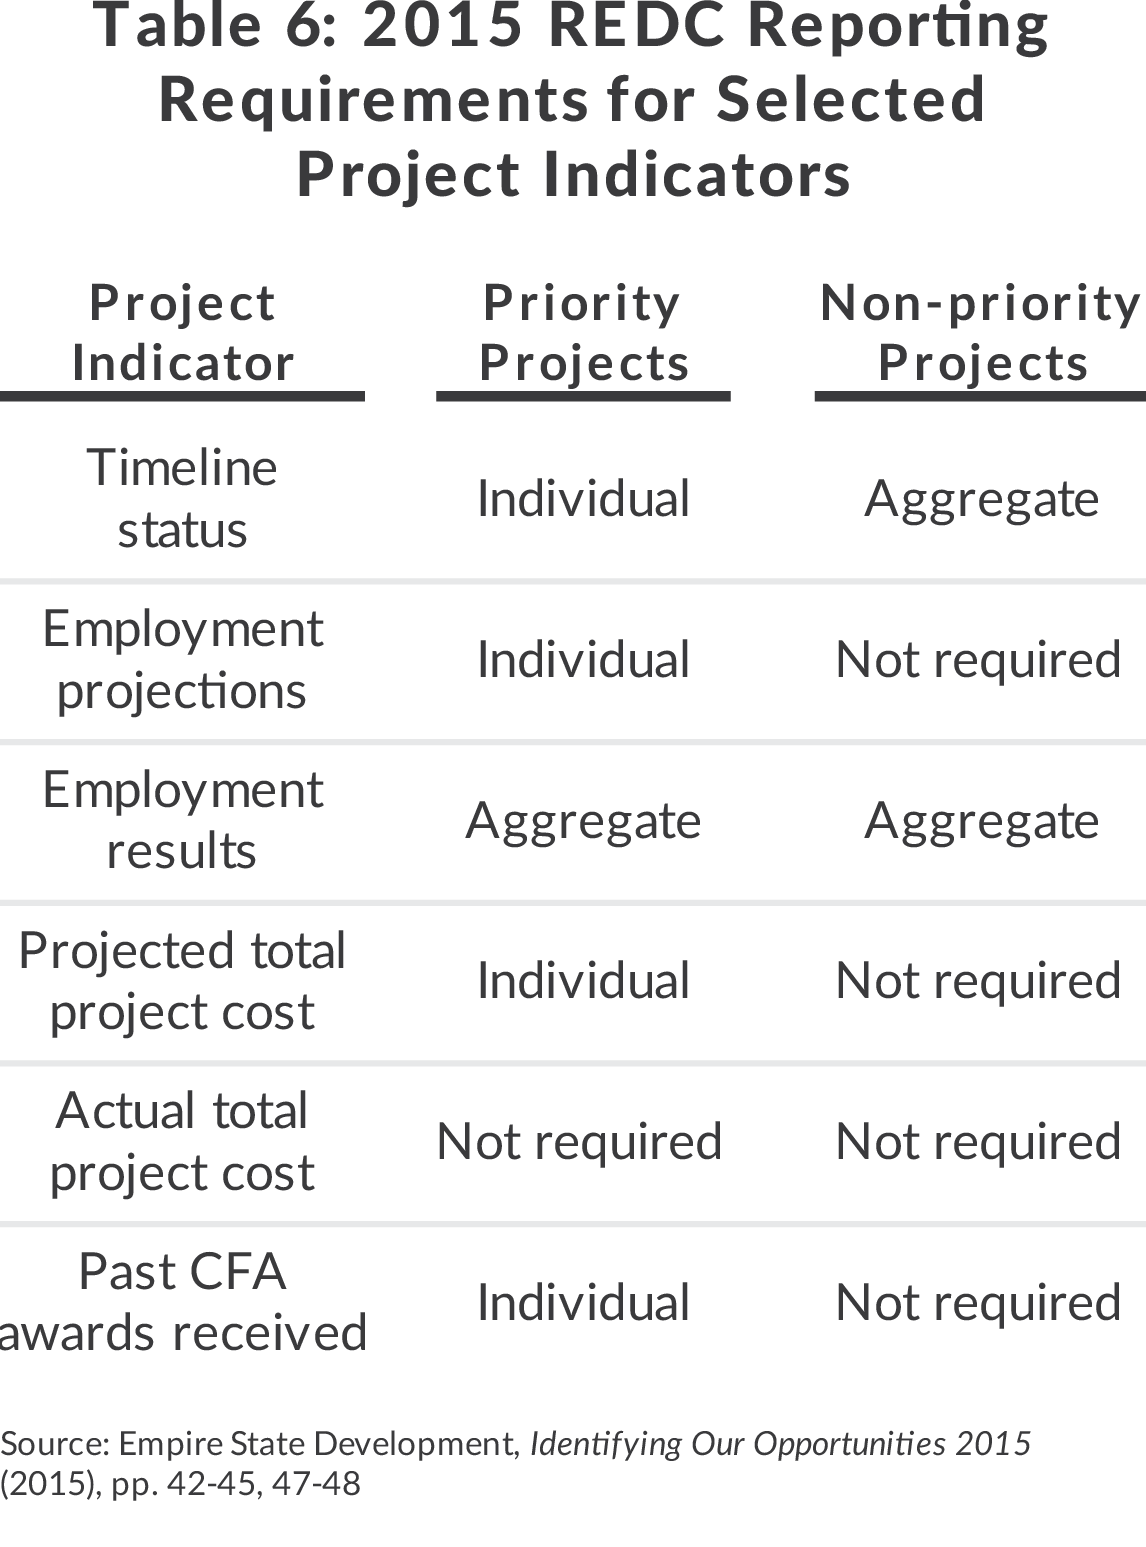 Table of Regional Economic Development Council reporting requirements for project indicators, priority projects and non-priority projects